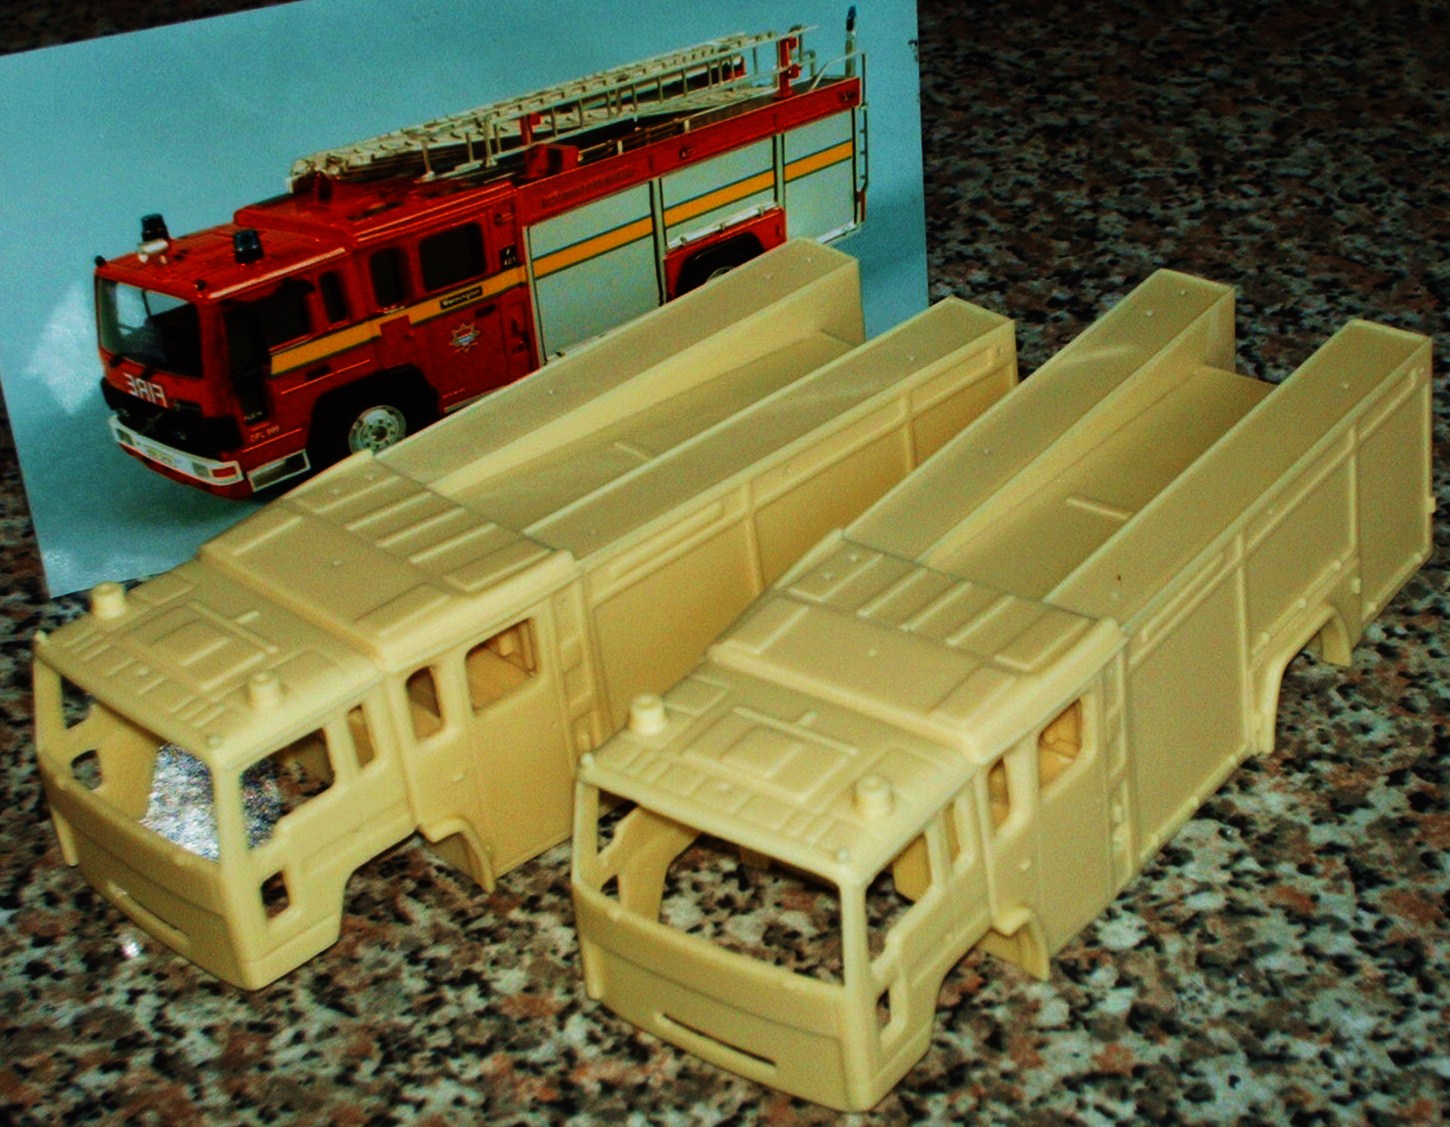 1/48th scale Volvo fire engine LFB resin kit | Flickr - Photo Sharing!